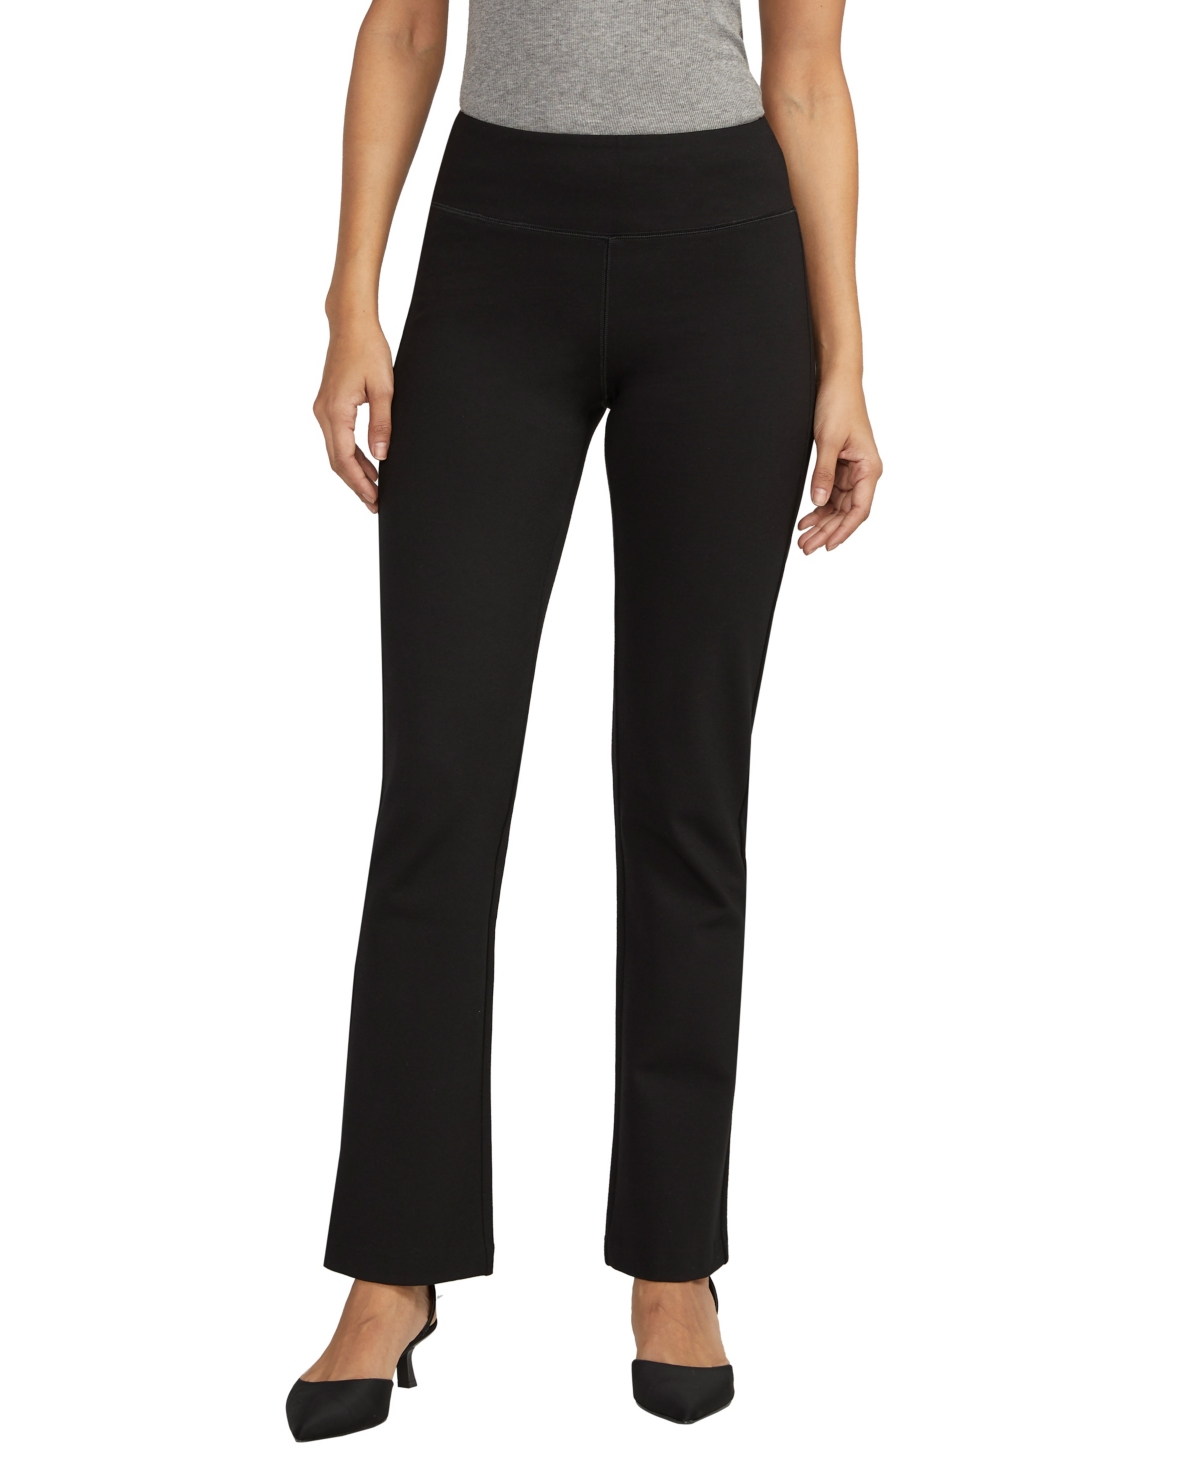 Women's Mid Rise Bootcut Pull-On Pants - Black